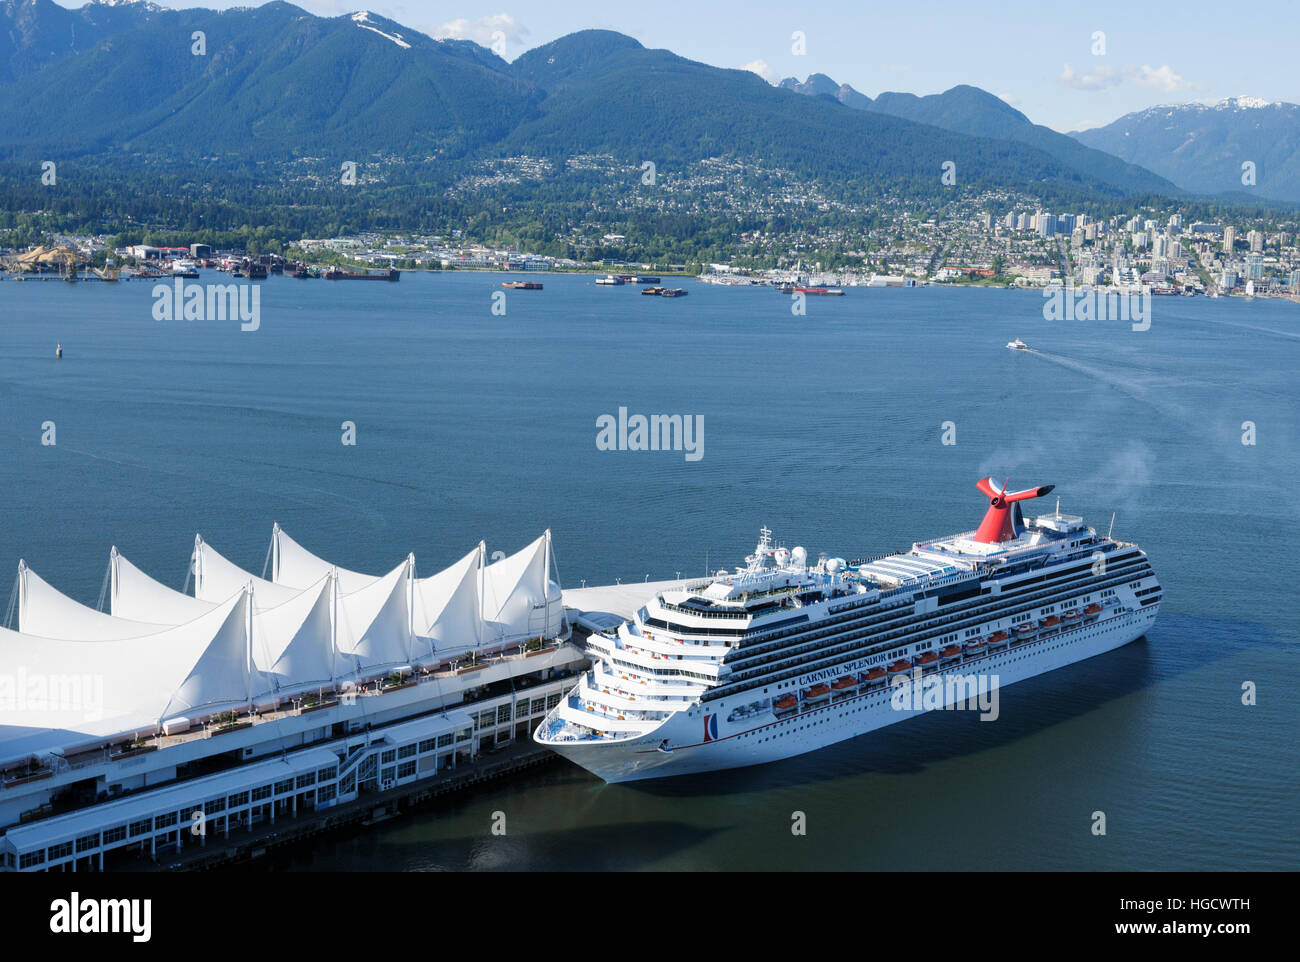 Carnival Splendor cruise ship moored at Canada Place cruise terminal, port of Vancouver, British Columbia, Canada Stock Photo